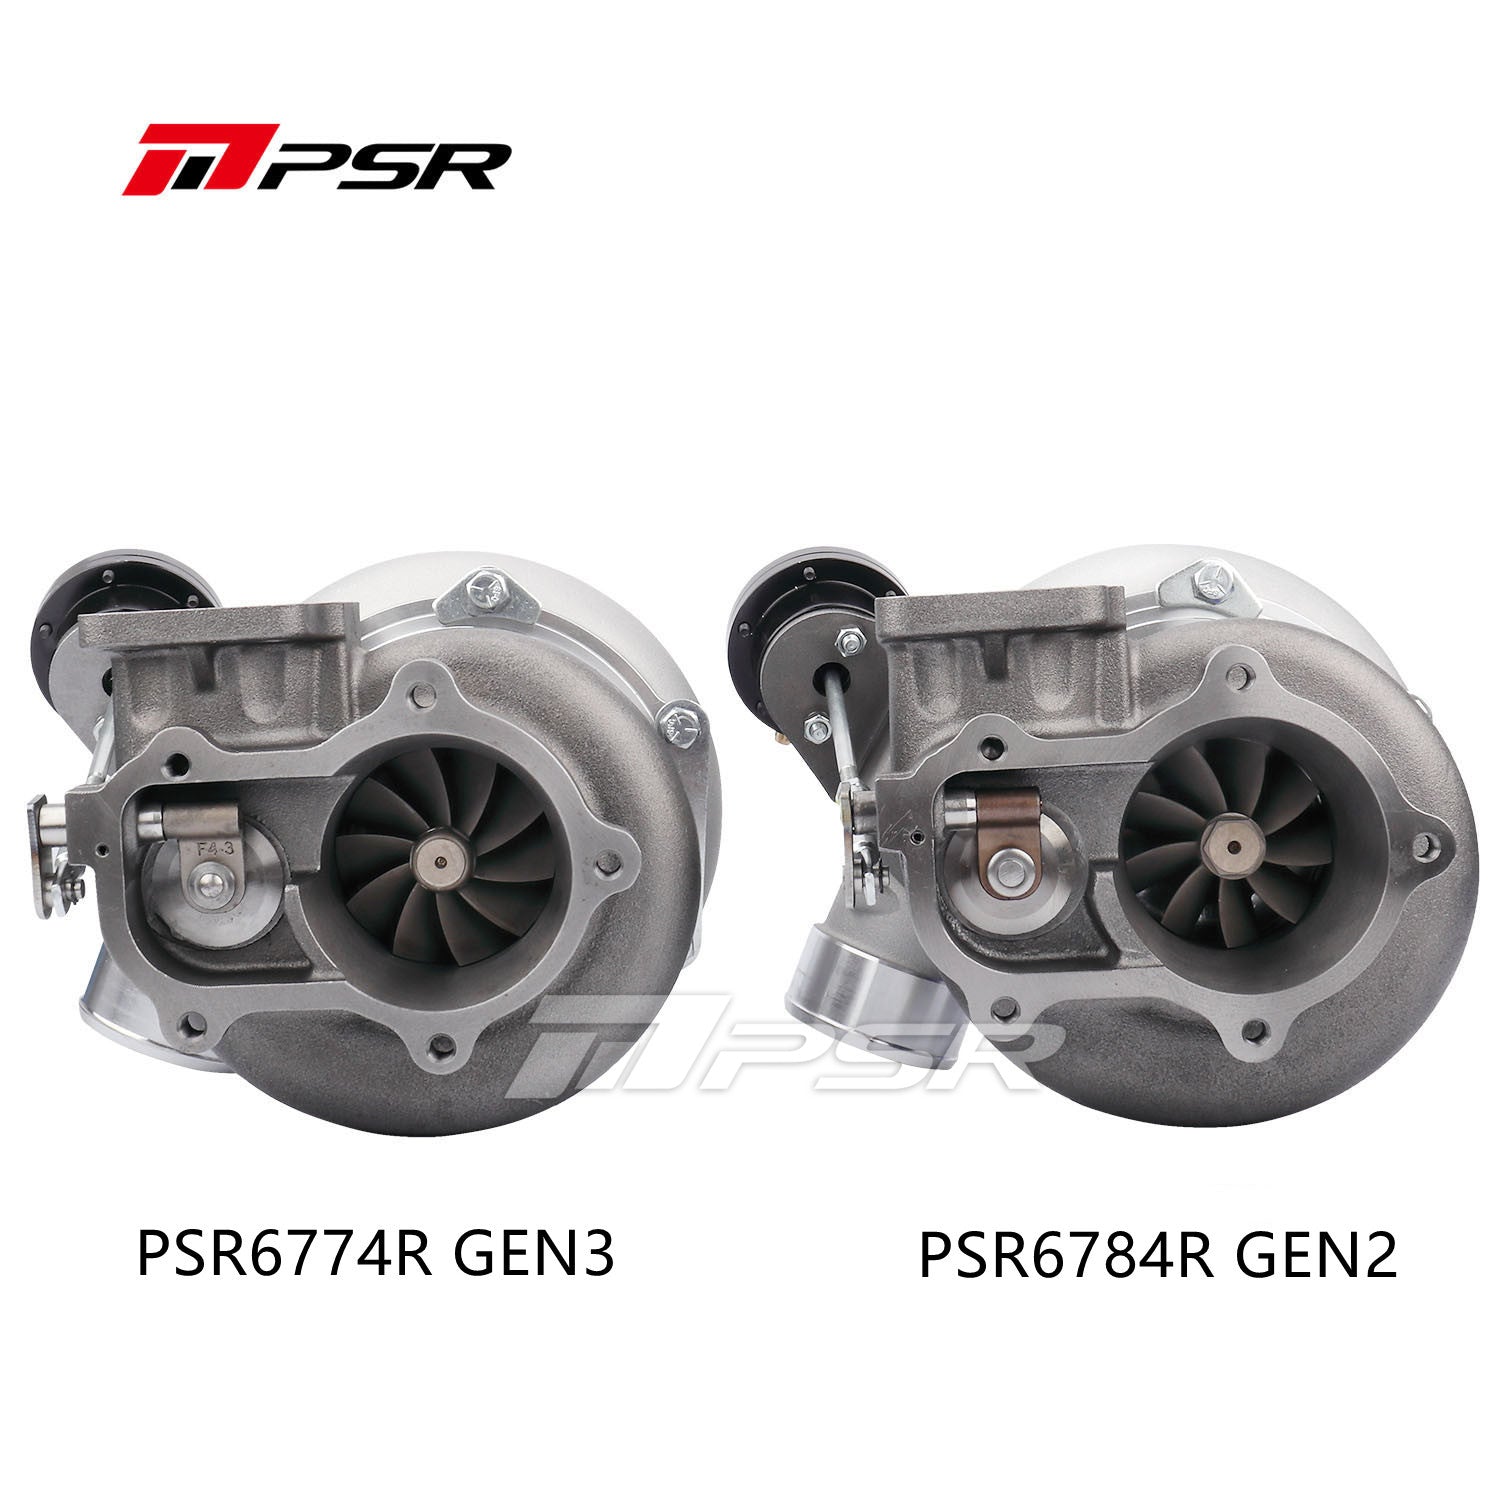 PSR6774R GEN3 Ball Bearing Turbo for Ford Falcon to replace the factory GT3582R turbo